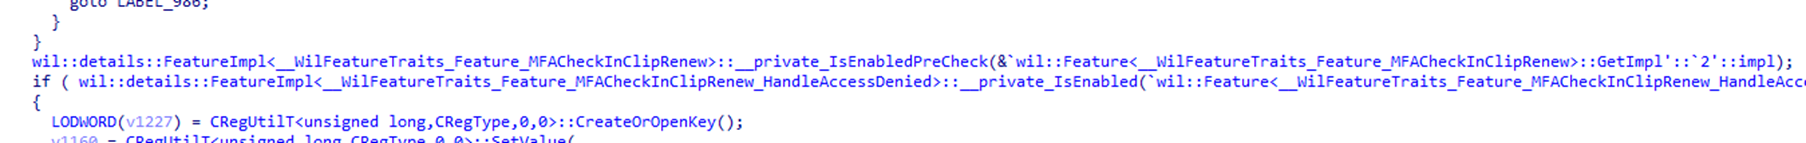 the cliprenew code showing the handle access denied